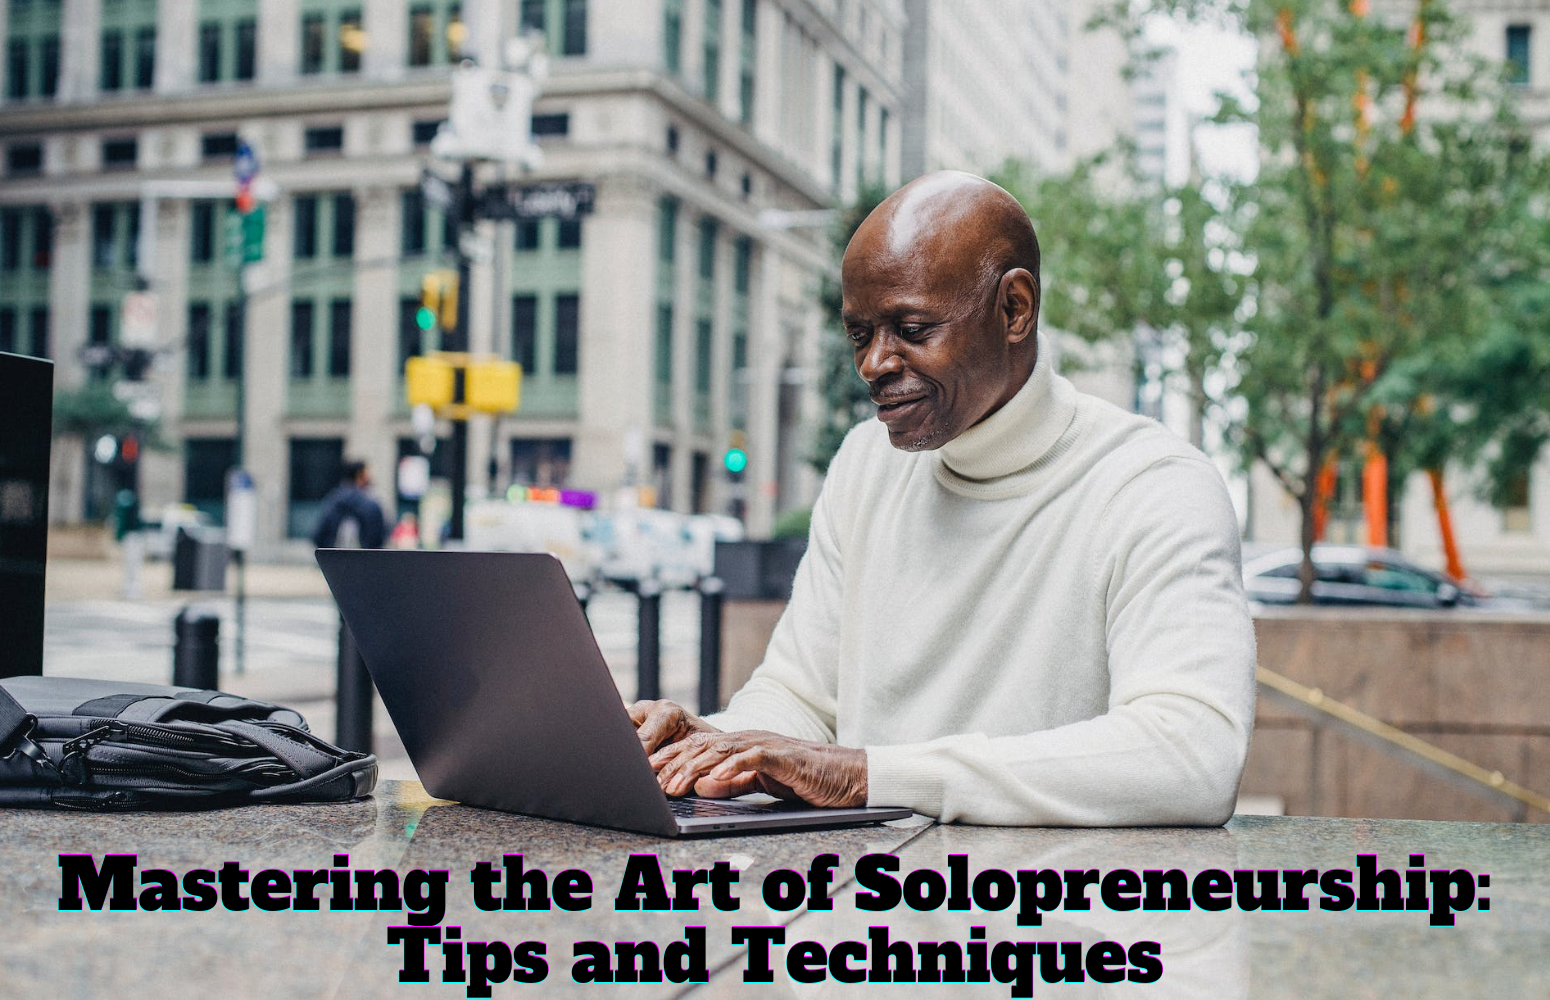 Solopreneurship Mastery - A Lone Entrepreneur Working on a Laptop